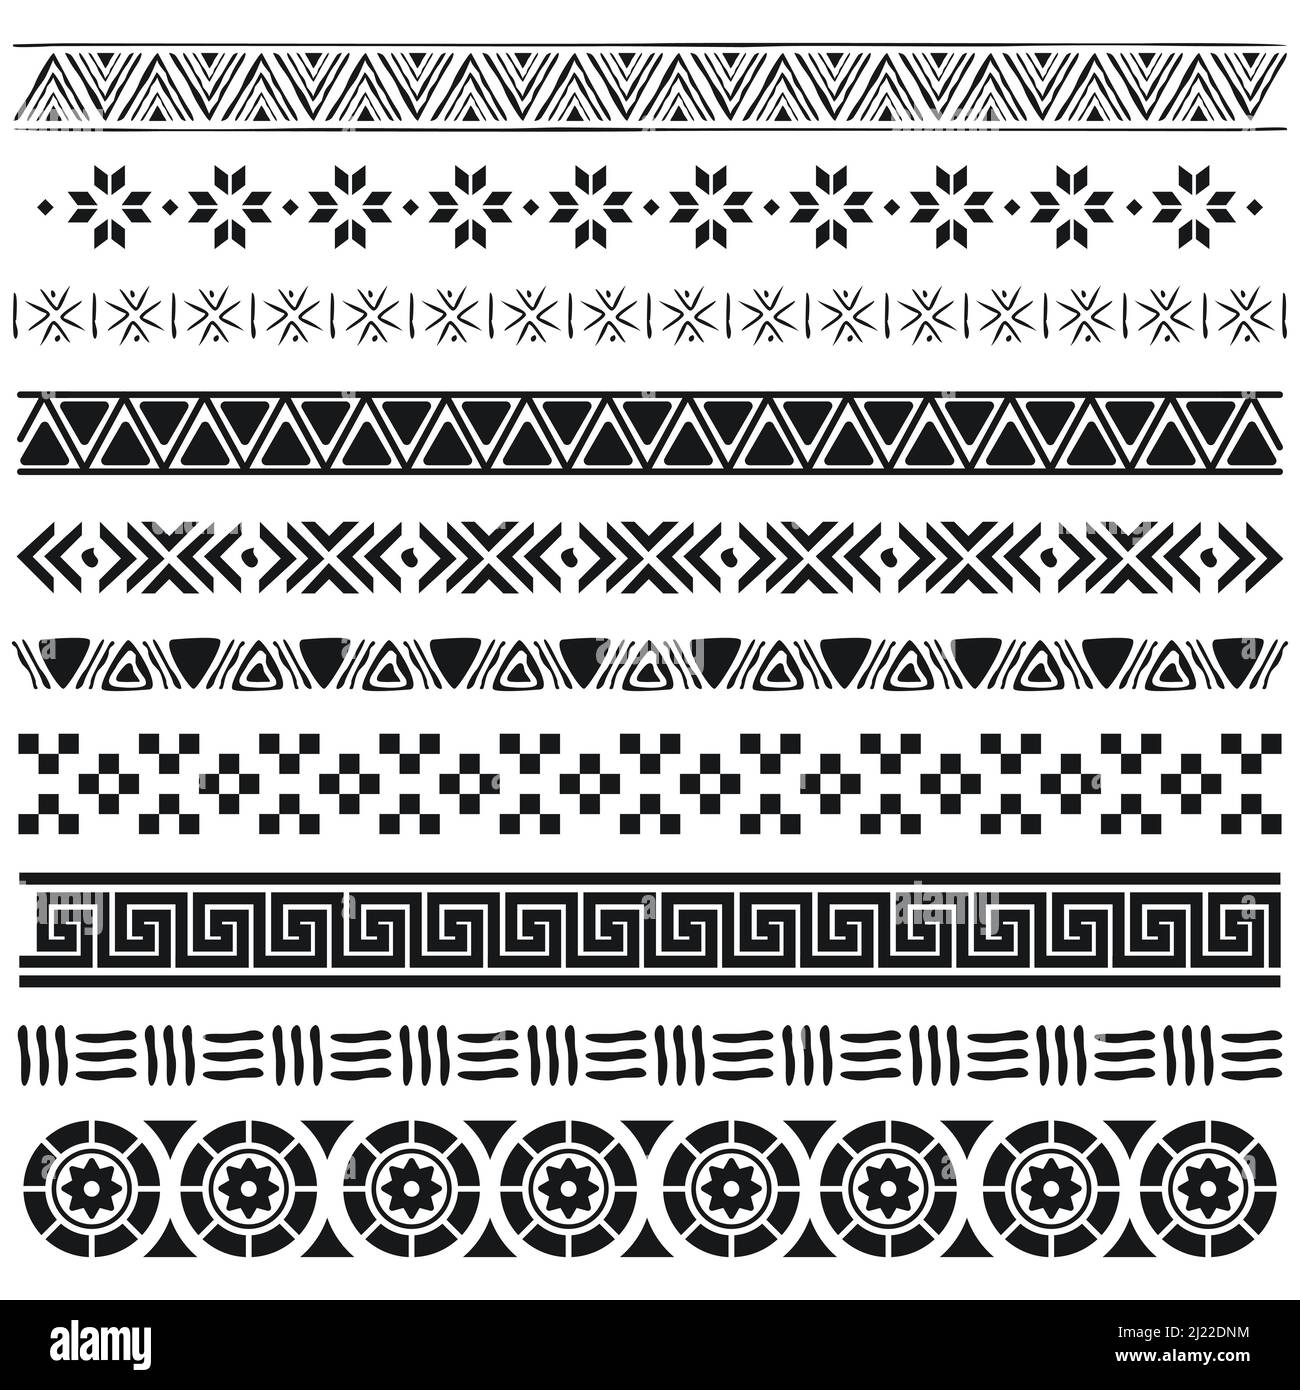 Aztec borders set. Ethnic ornament, decoration patterns in Arabic, Egyptian or native American tribal styles. Traditional ornate black dividers vector Stock Vector